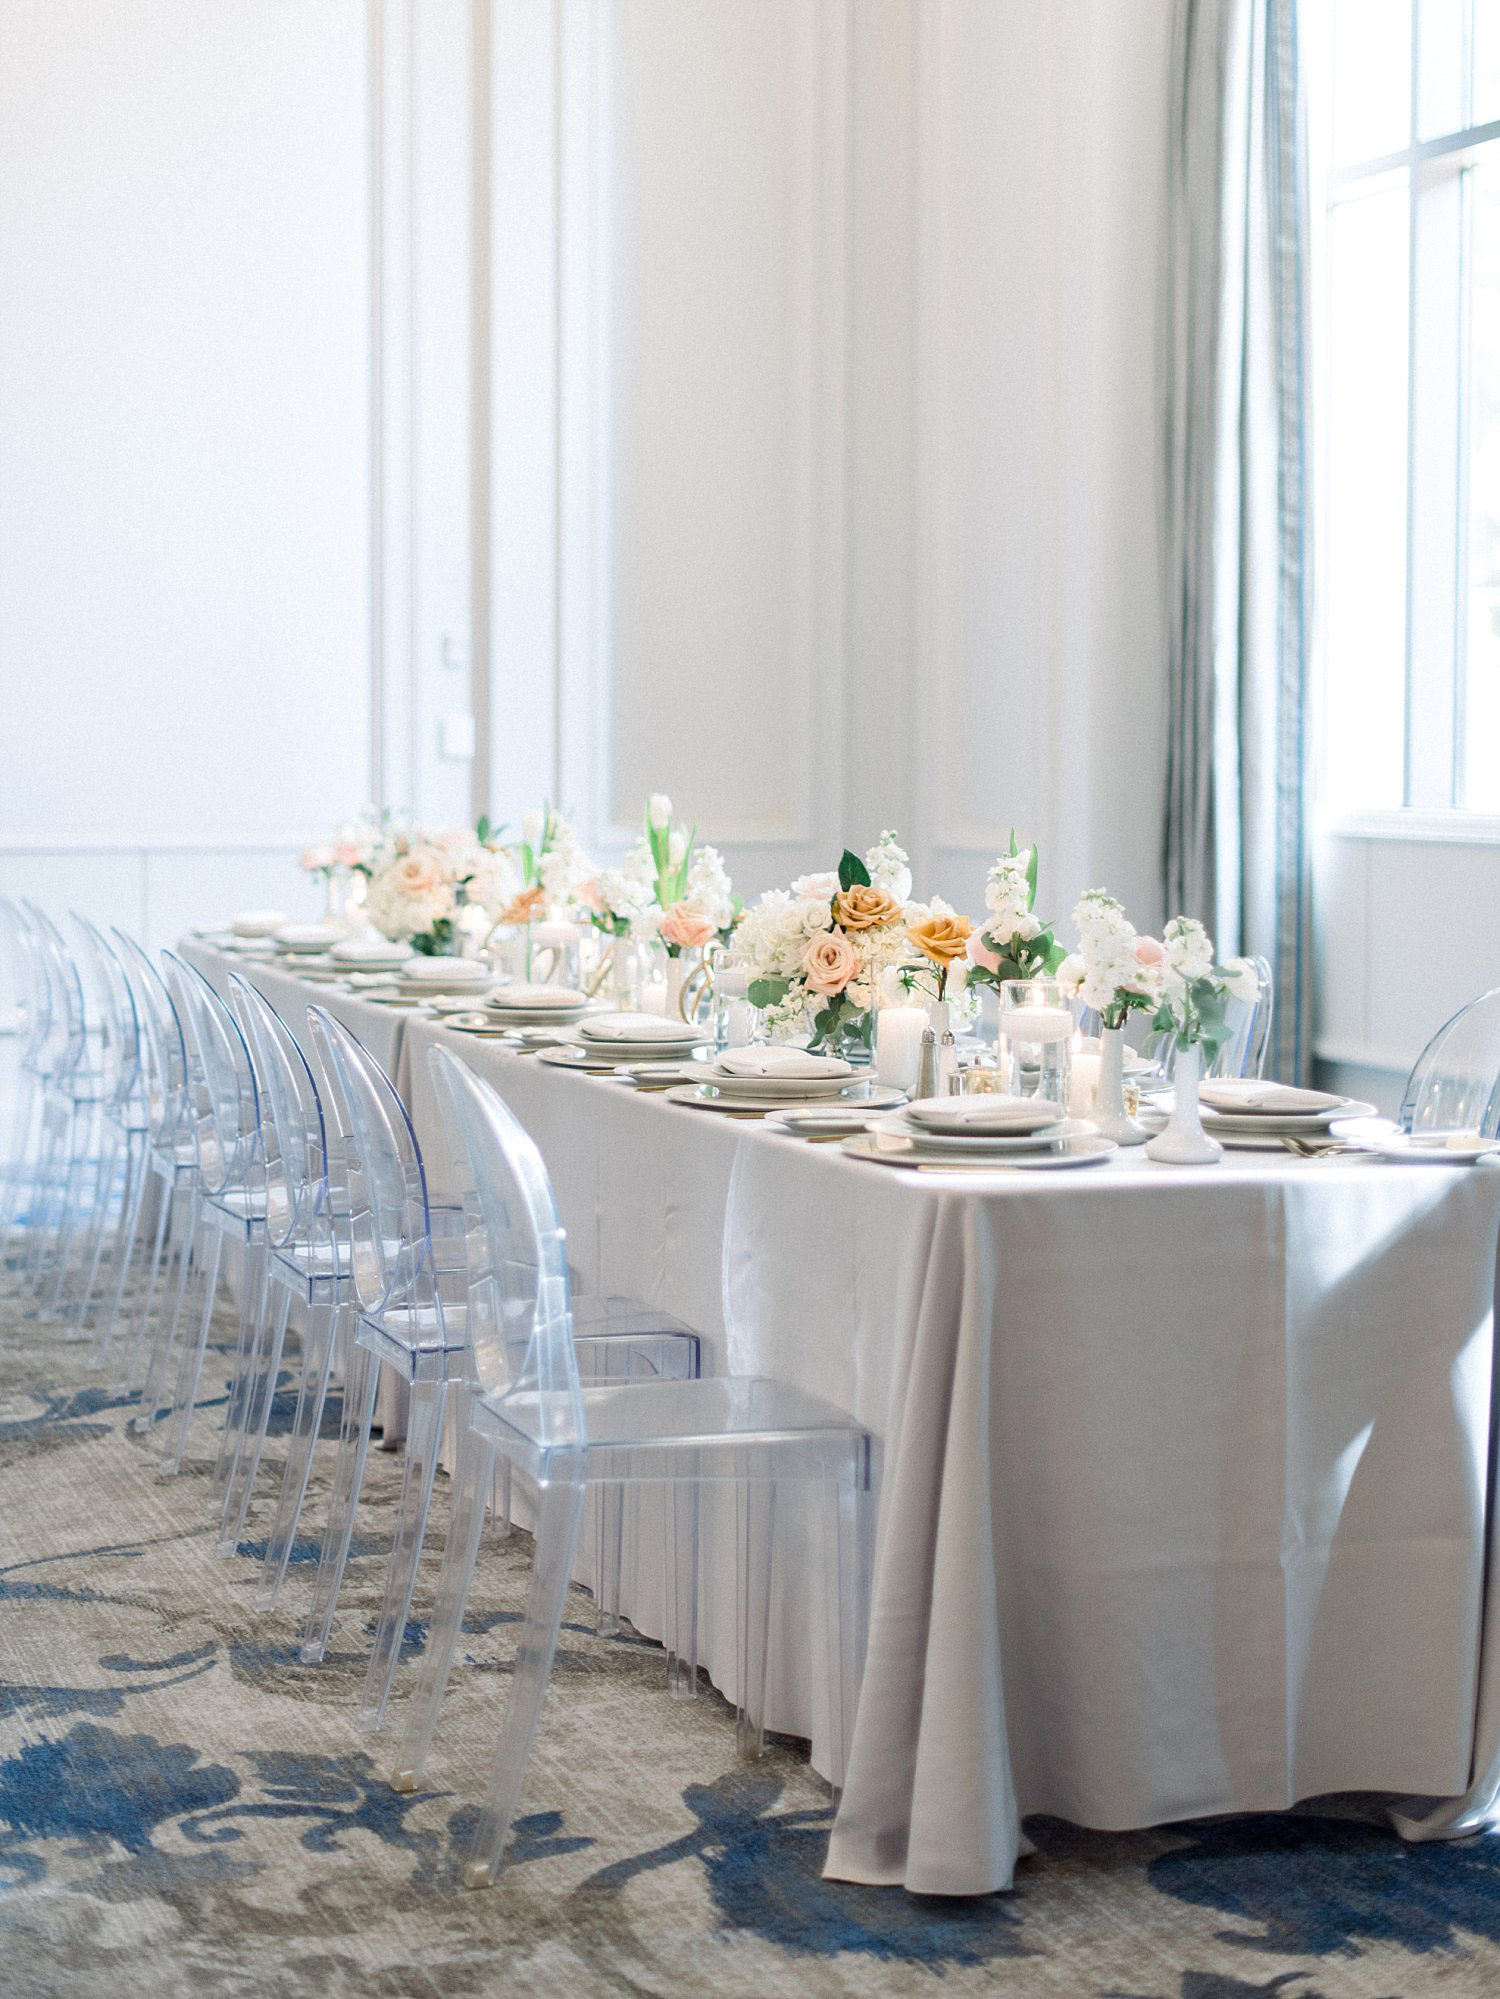 Ballroom wedding with Acrylic Chairs with a light grey linen